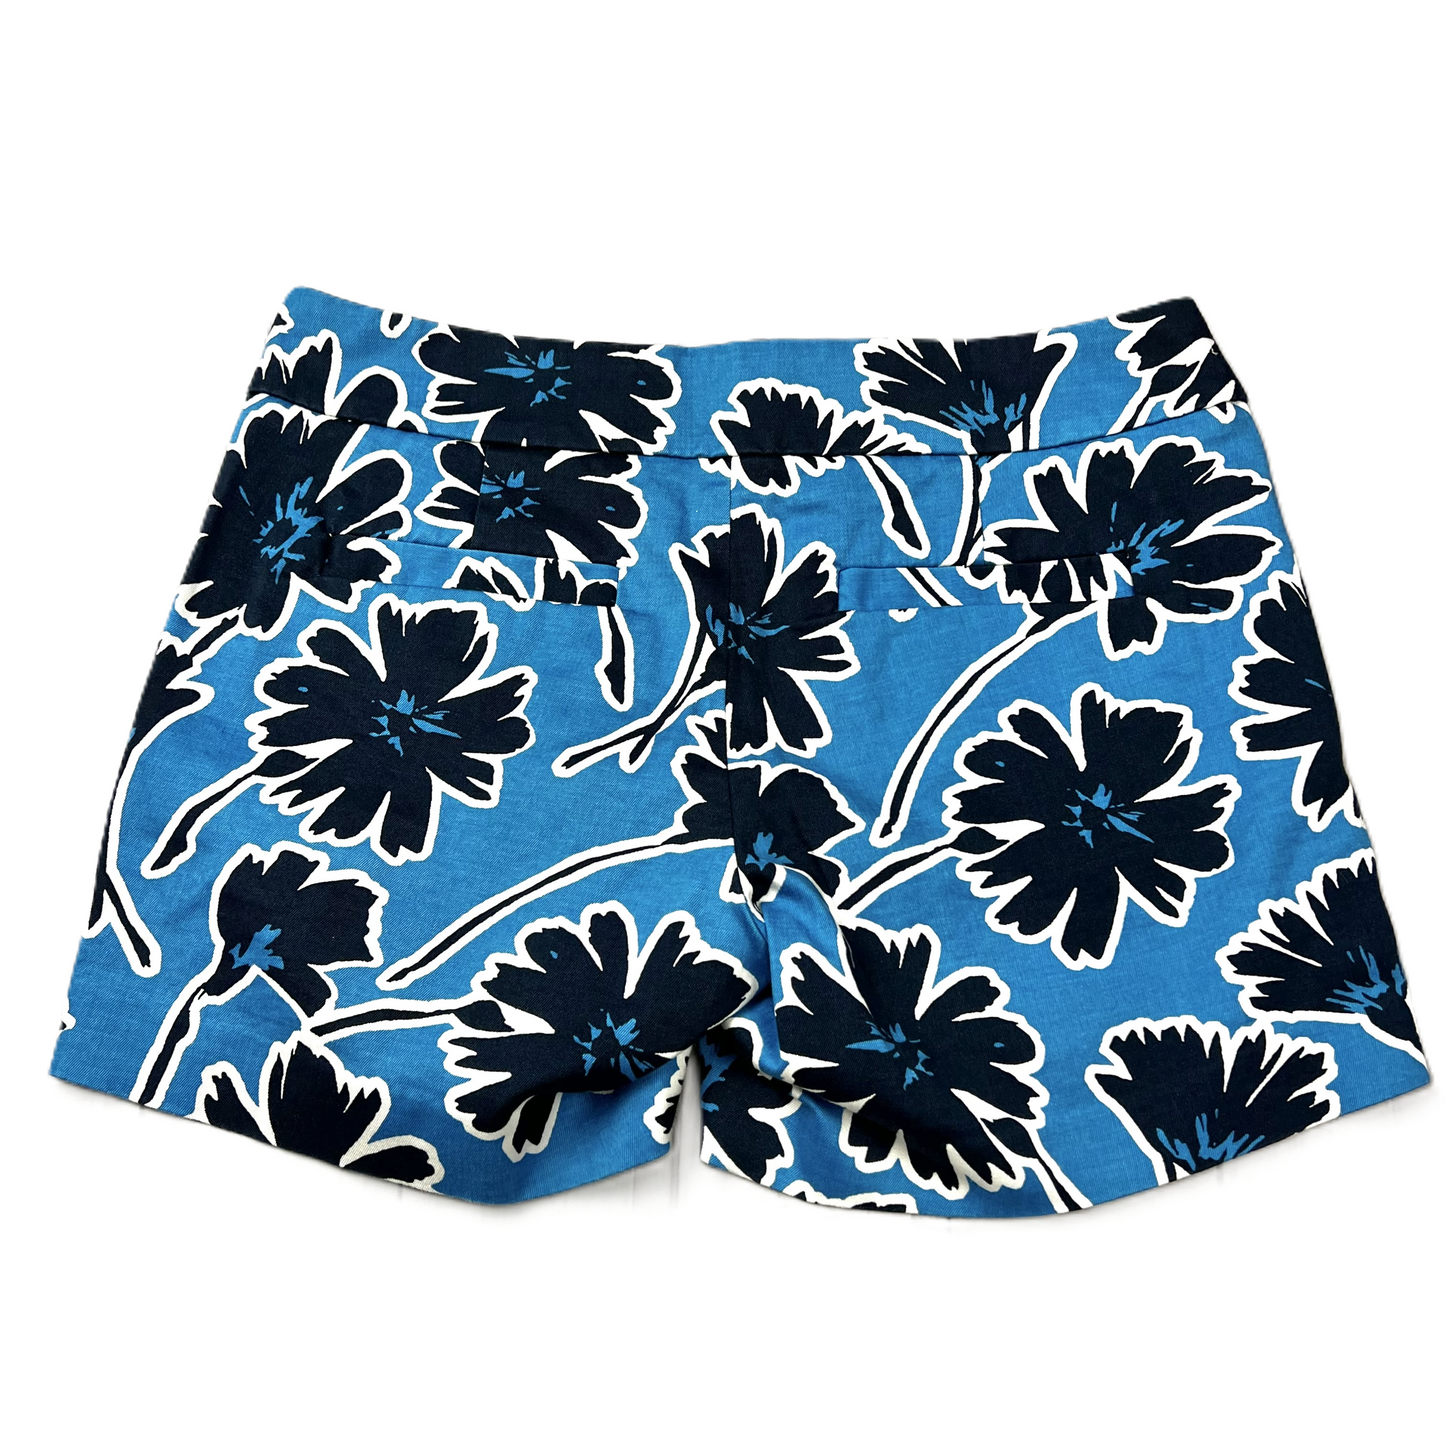 Blue Shorts By J. Crew, Size: 4